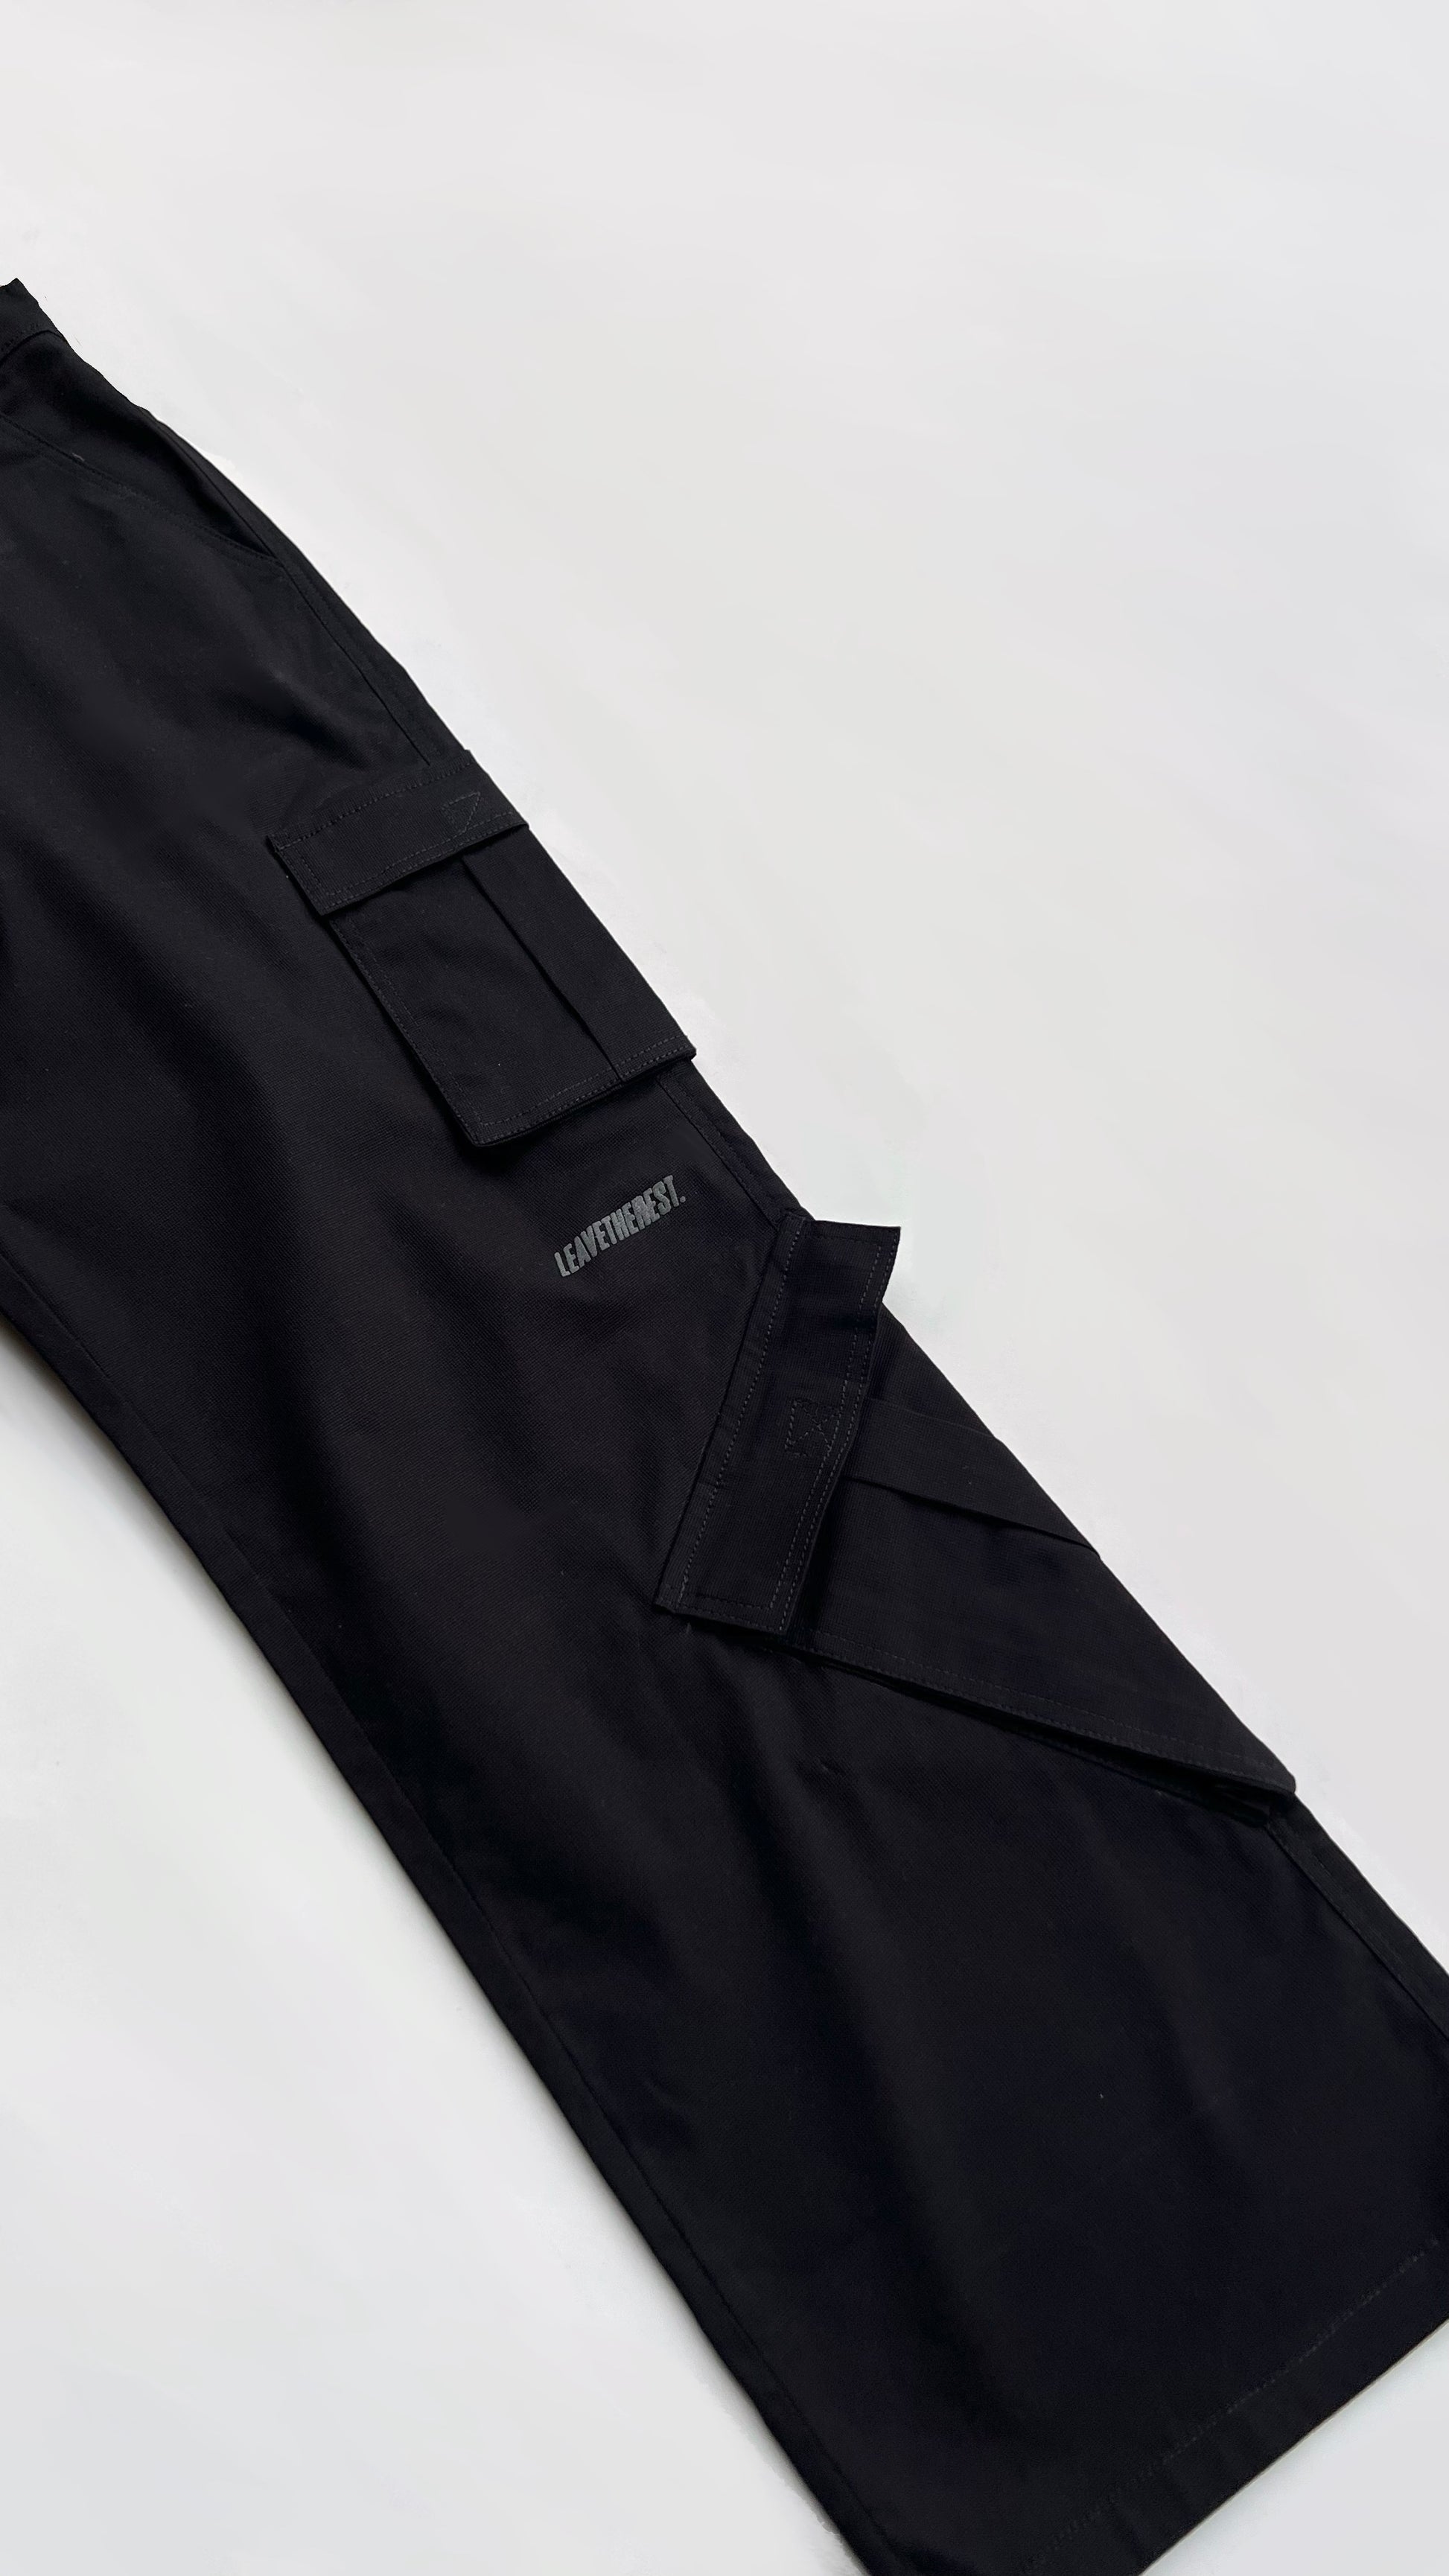 TNA Solid Black Cargo Pants Size M - 70% off